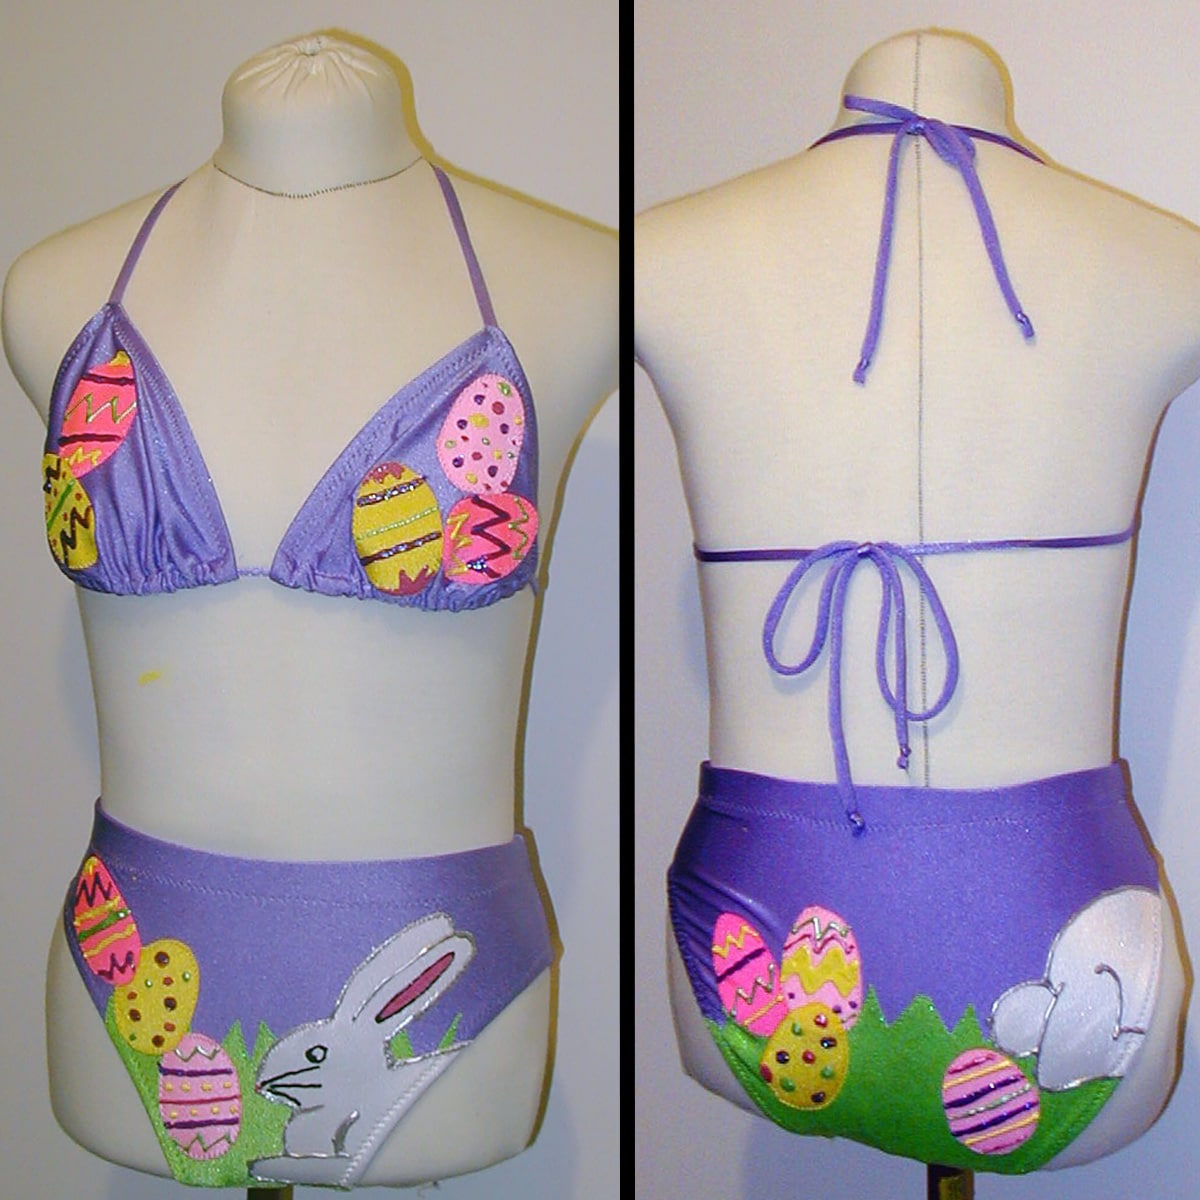 Front and back views of a light purple bikini decorated in an Easter theme.